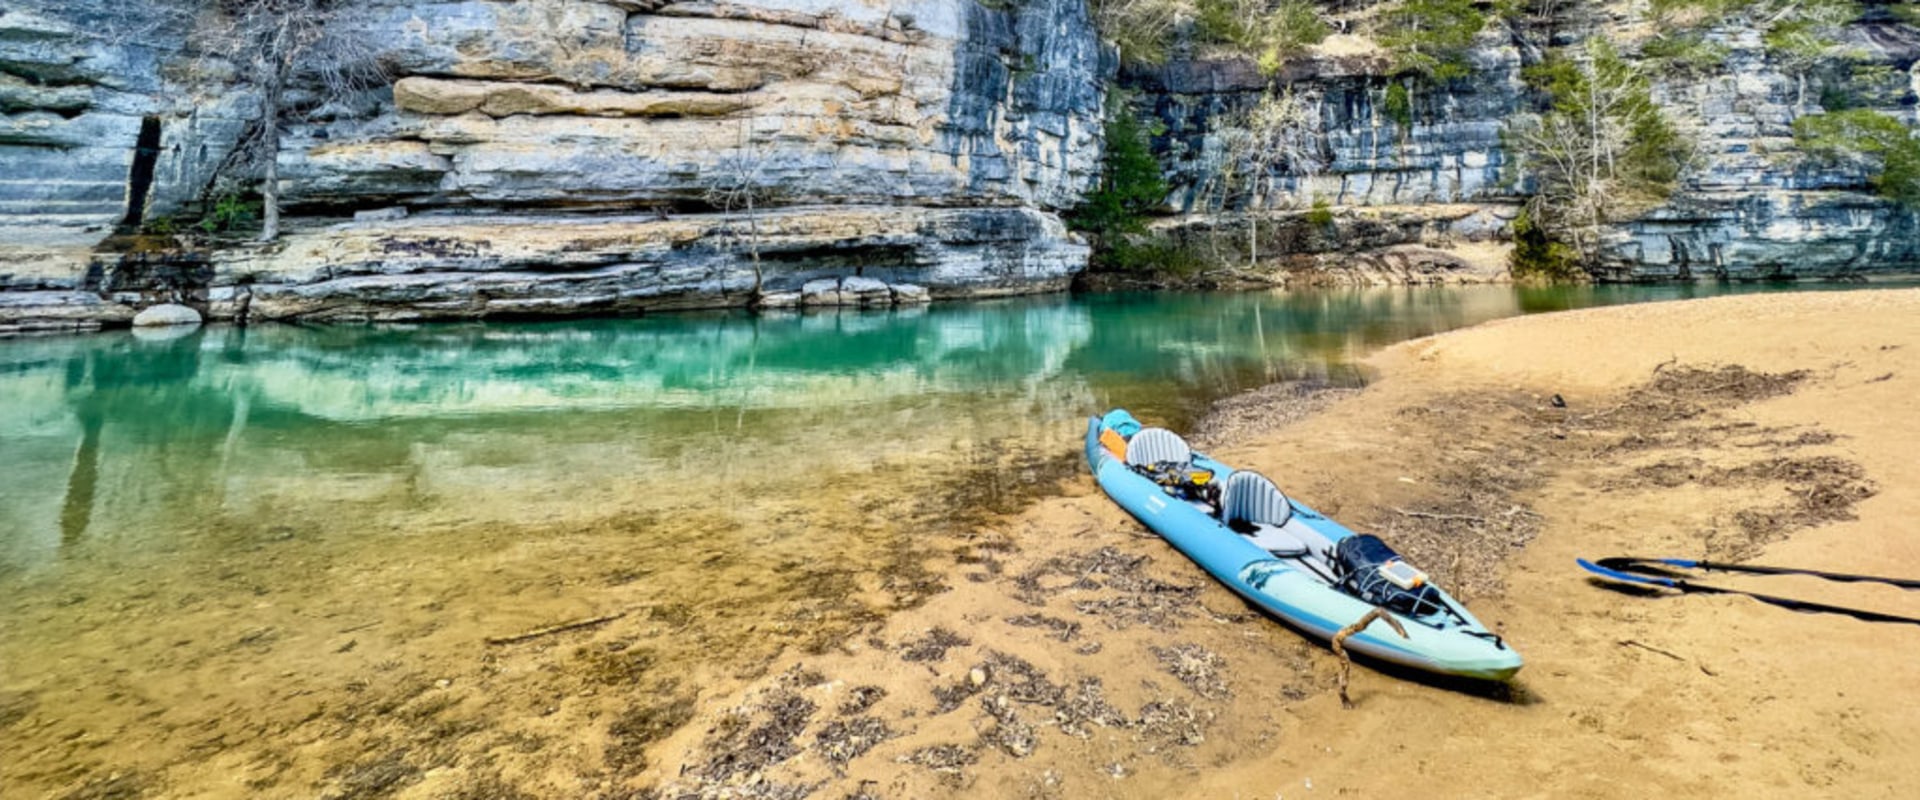 Experience the Great Outdoors on a Budget in Austin, Arkansas